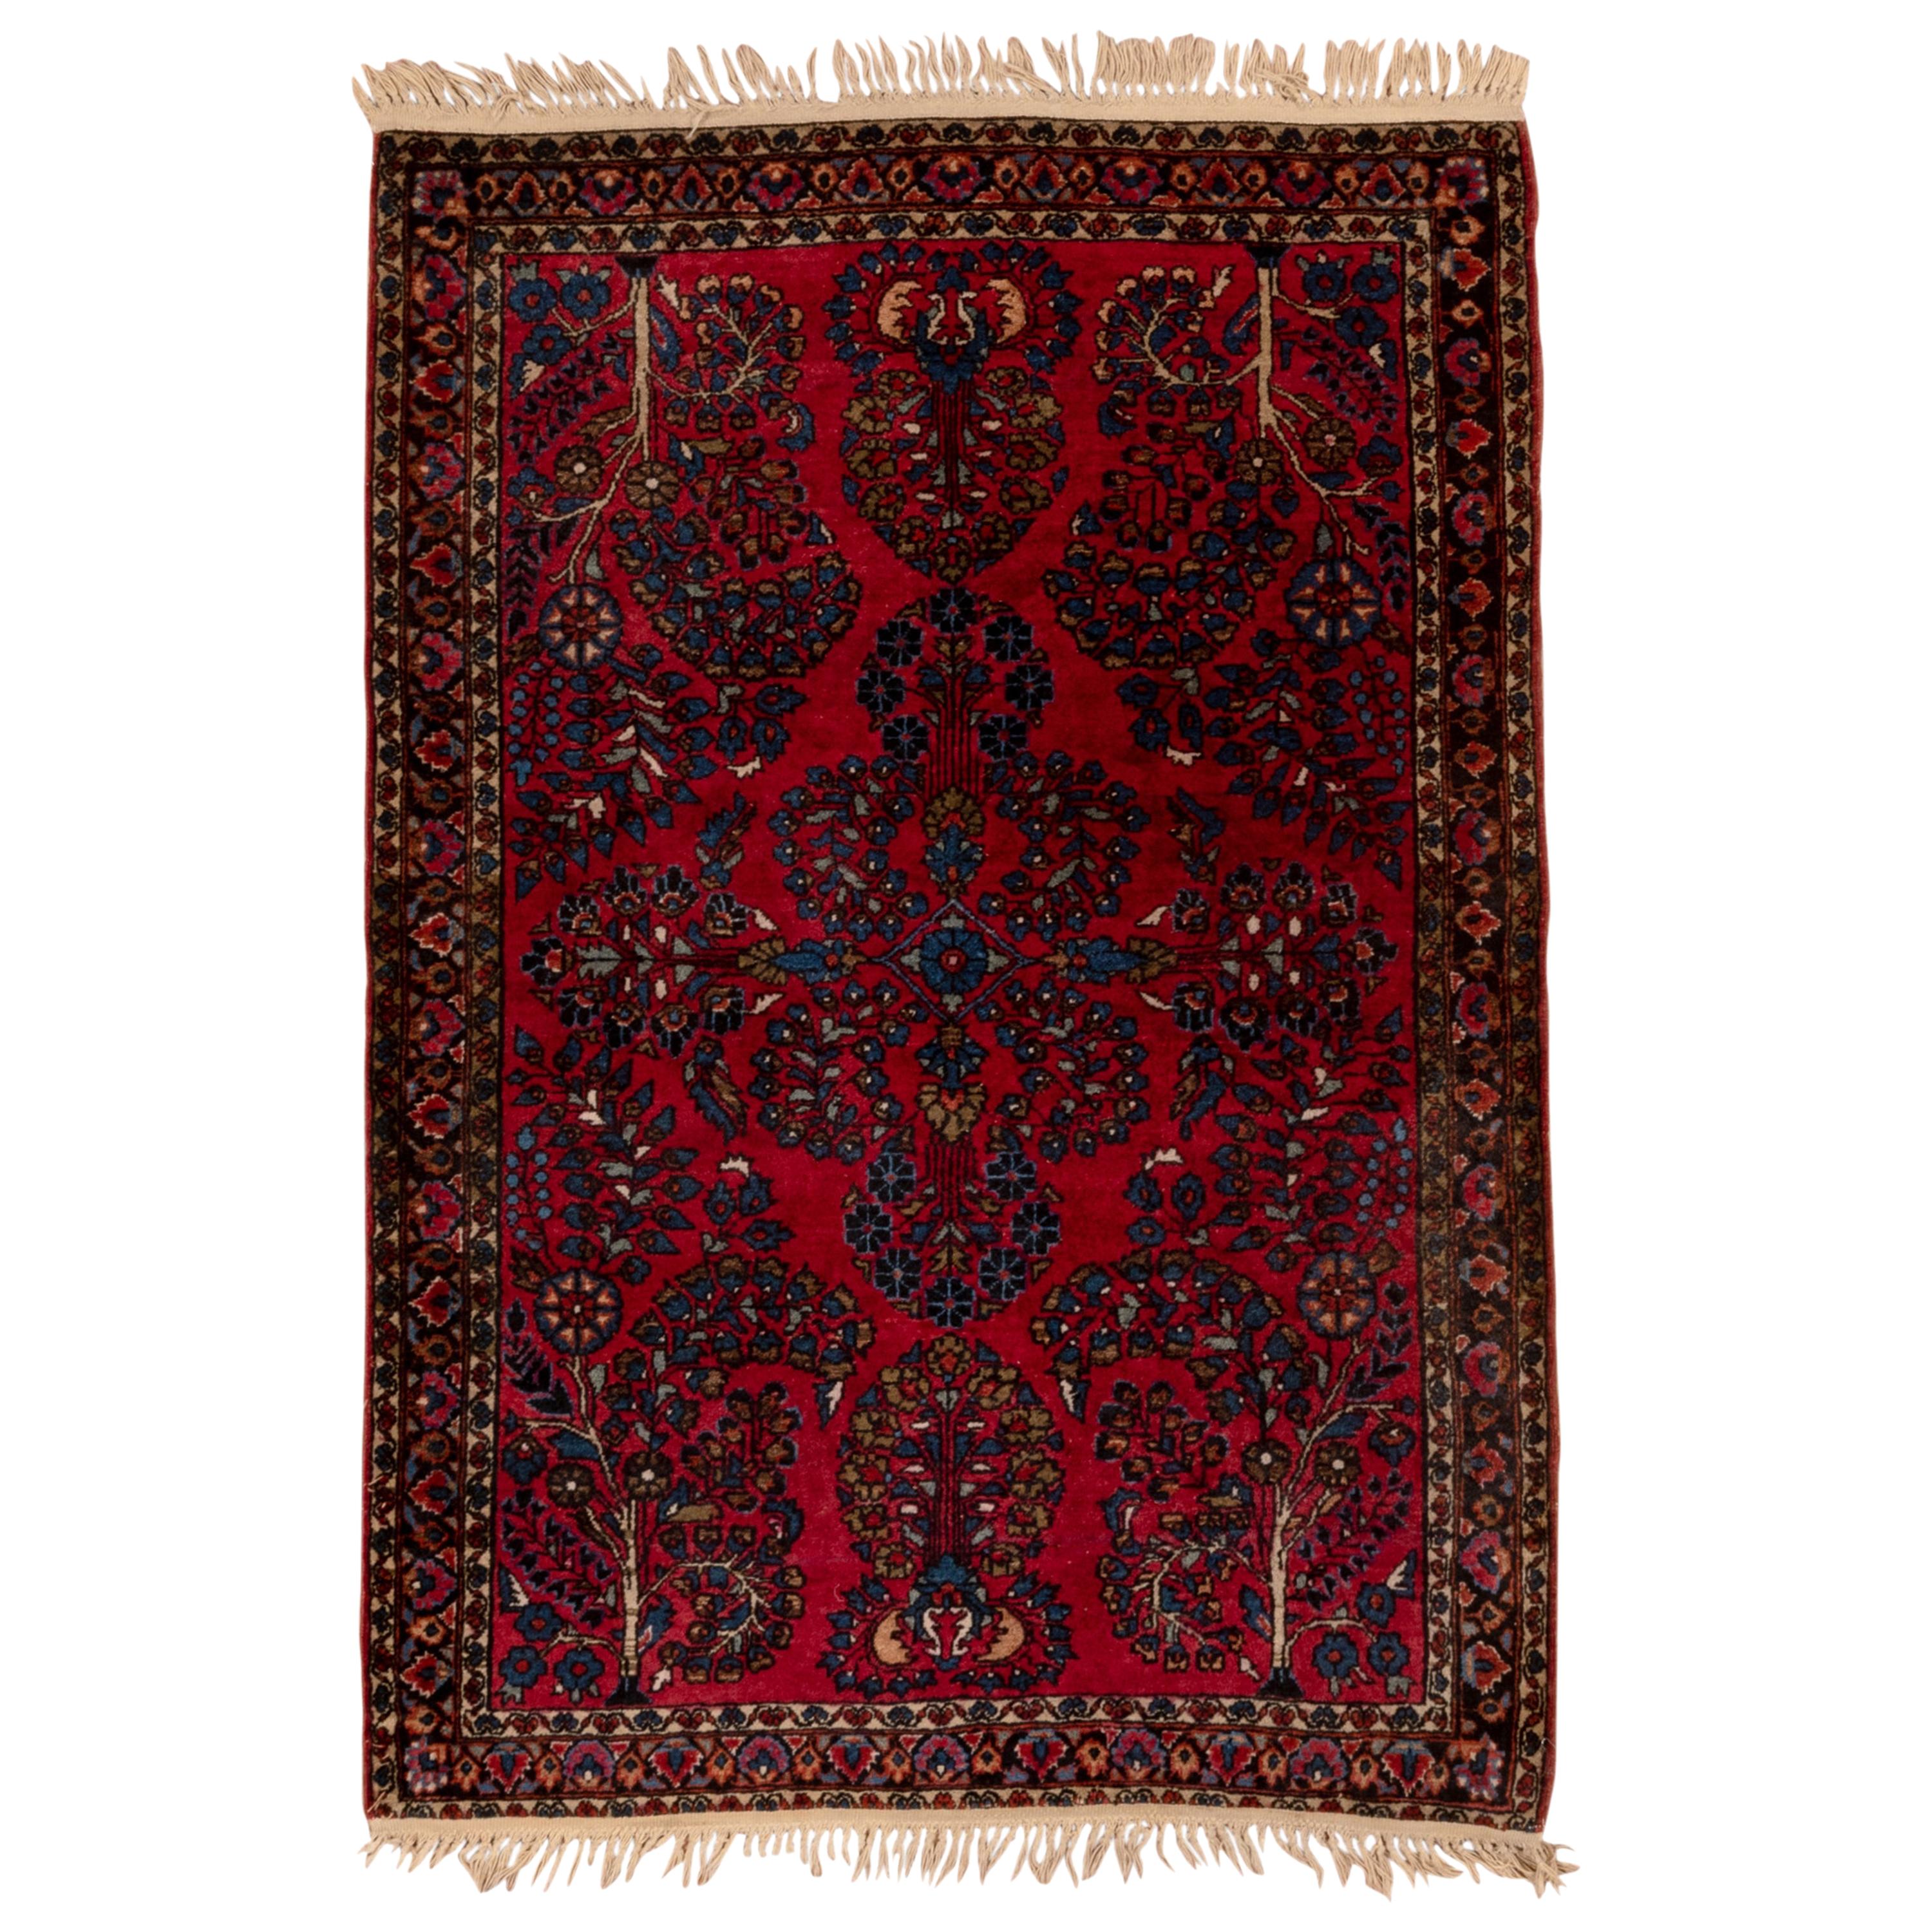 Mid-20th Century Persian Sarouk Rug, Red Field, Medium Pile, Blue Acents For Sale